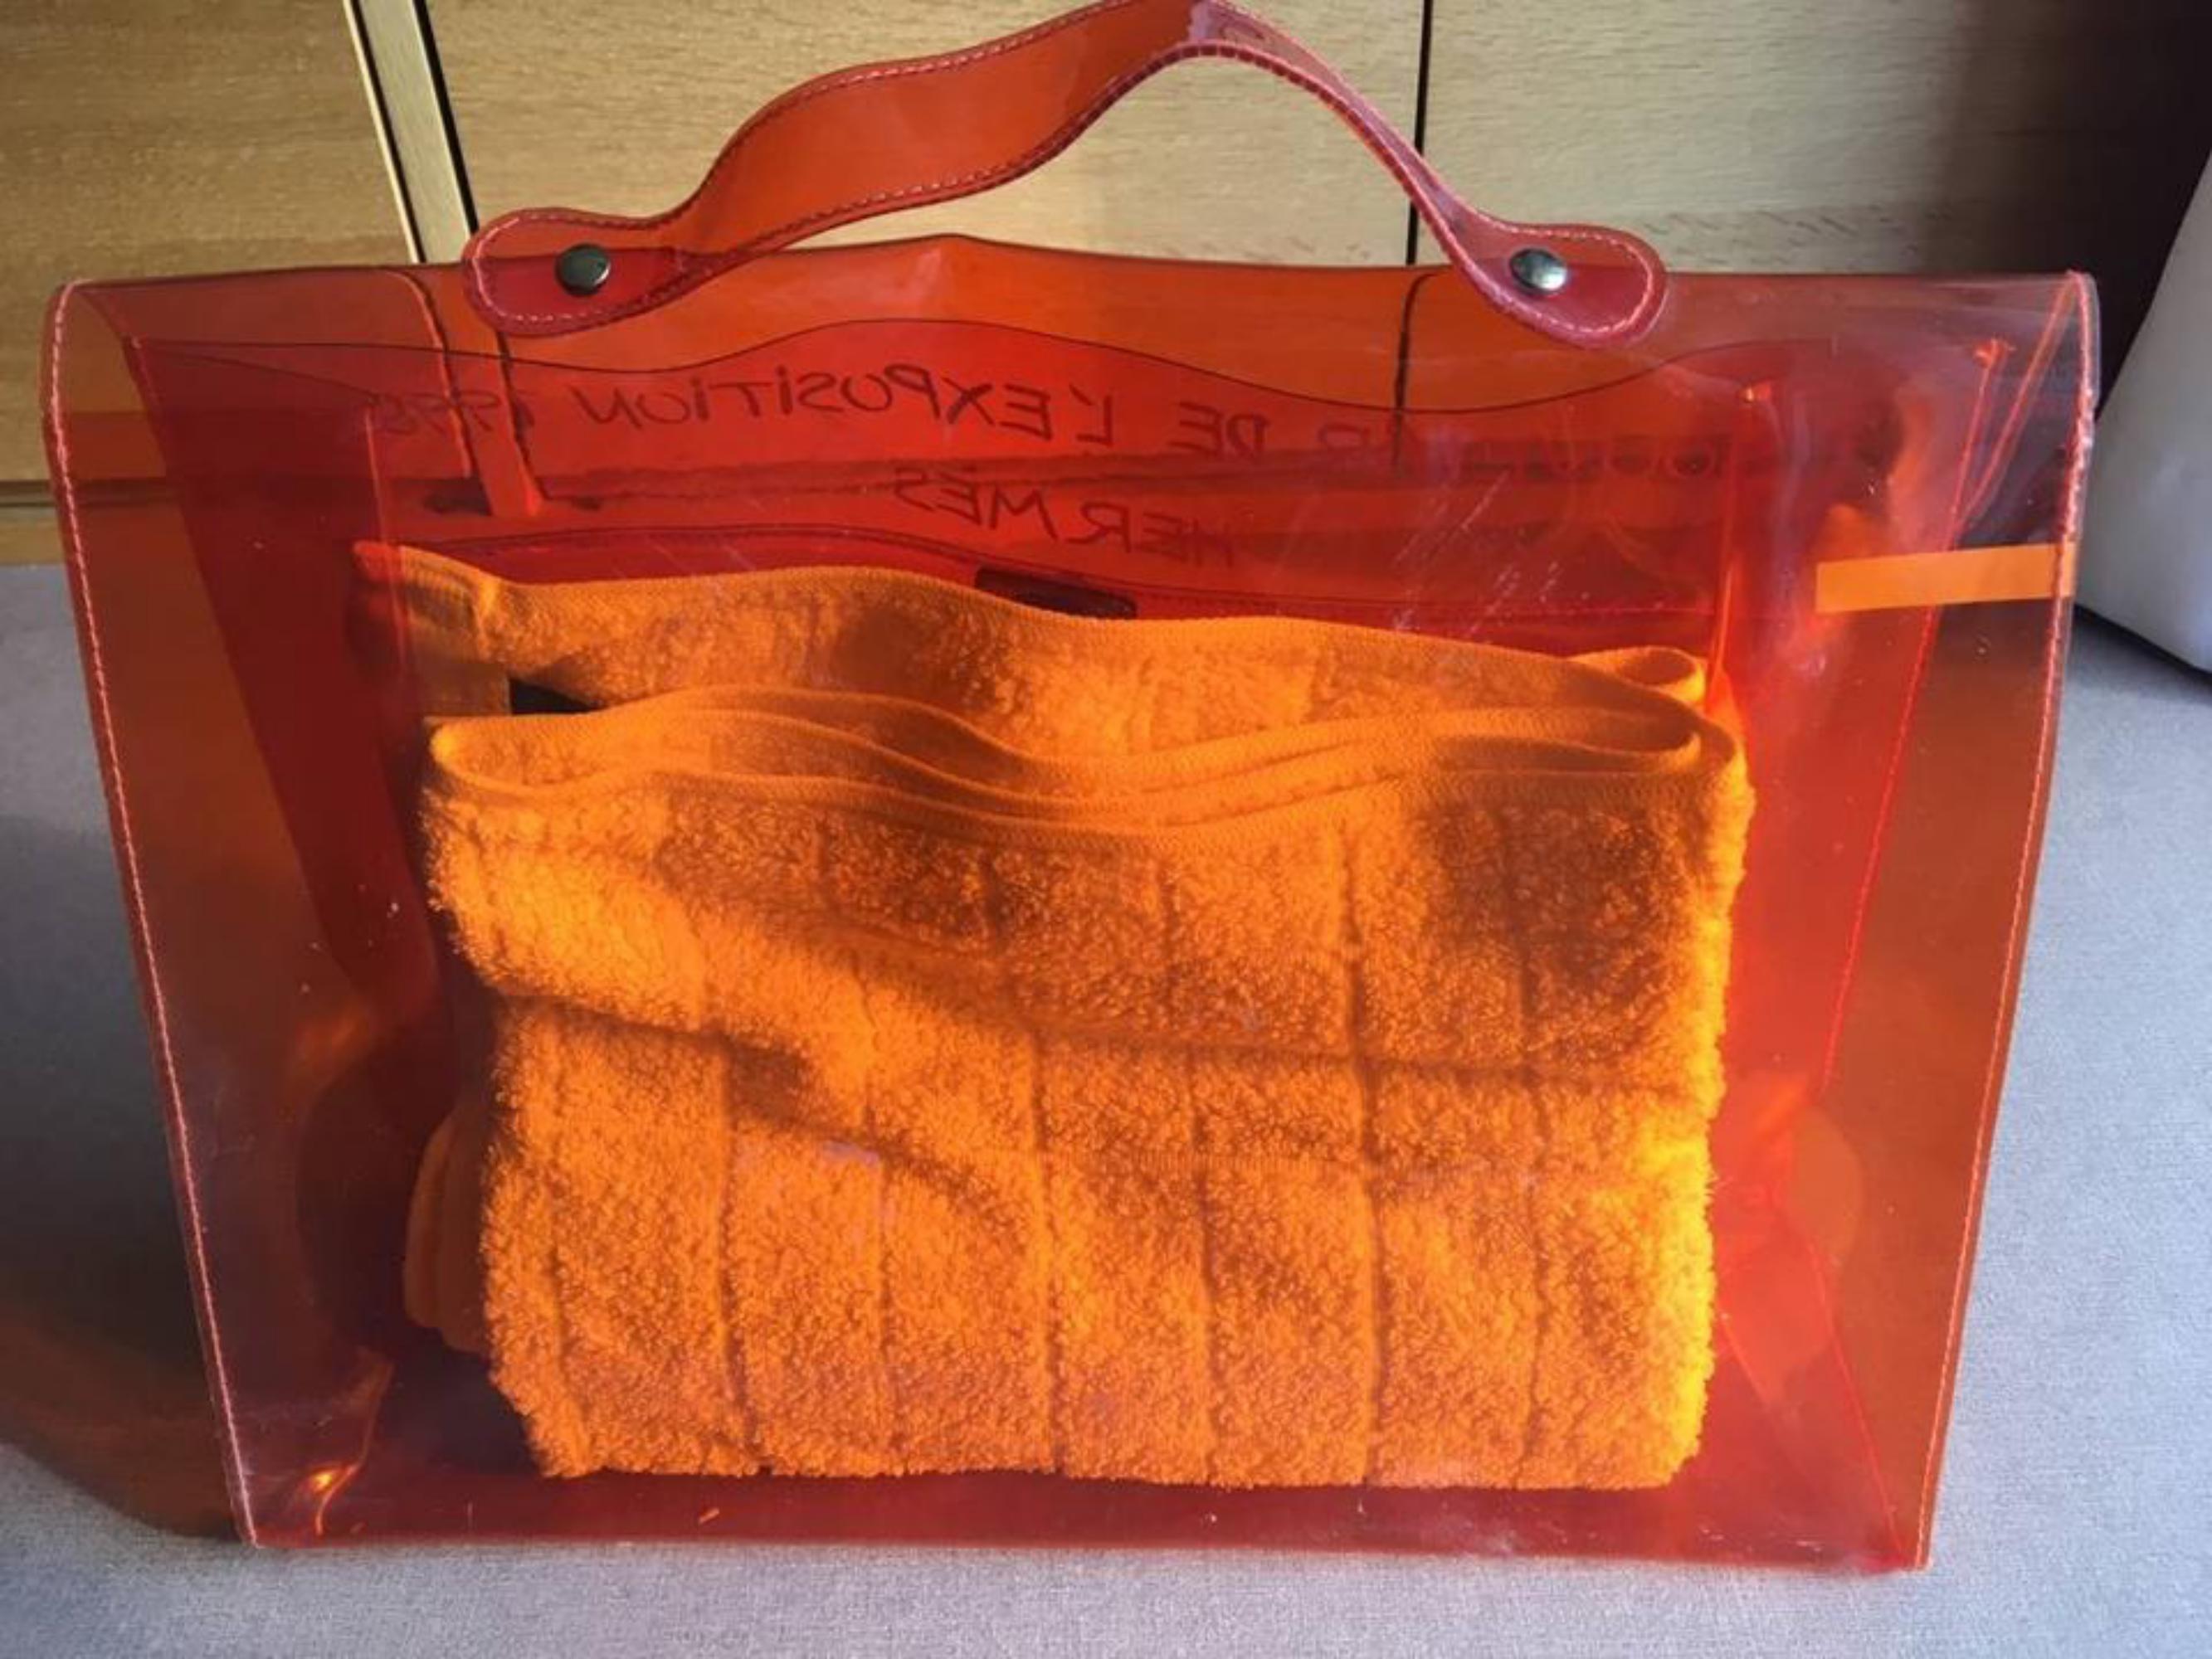 Hermès Kelly 1998 Souvenir D'exposition Clear 230222 Orange Vinyl Messenger Bag In Good Condition For Sale In Forest Hills, NY